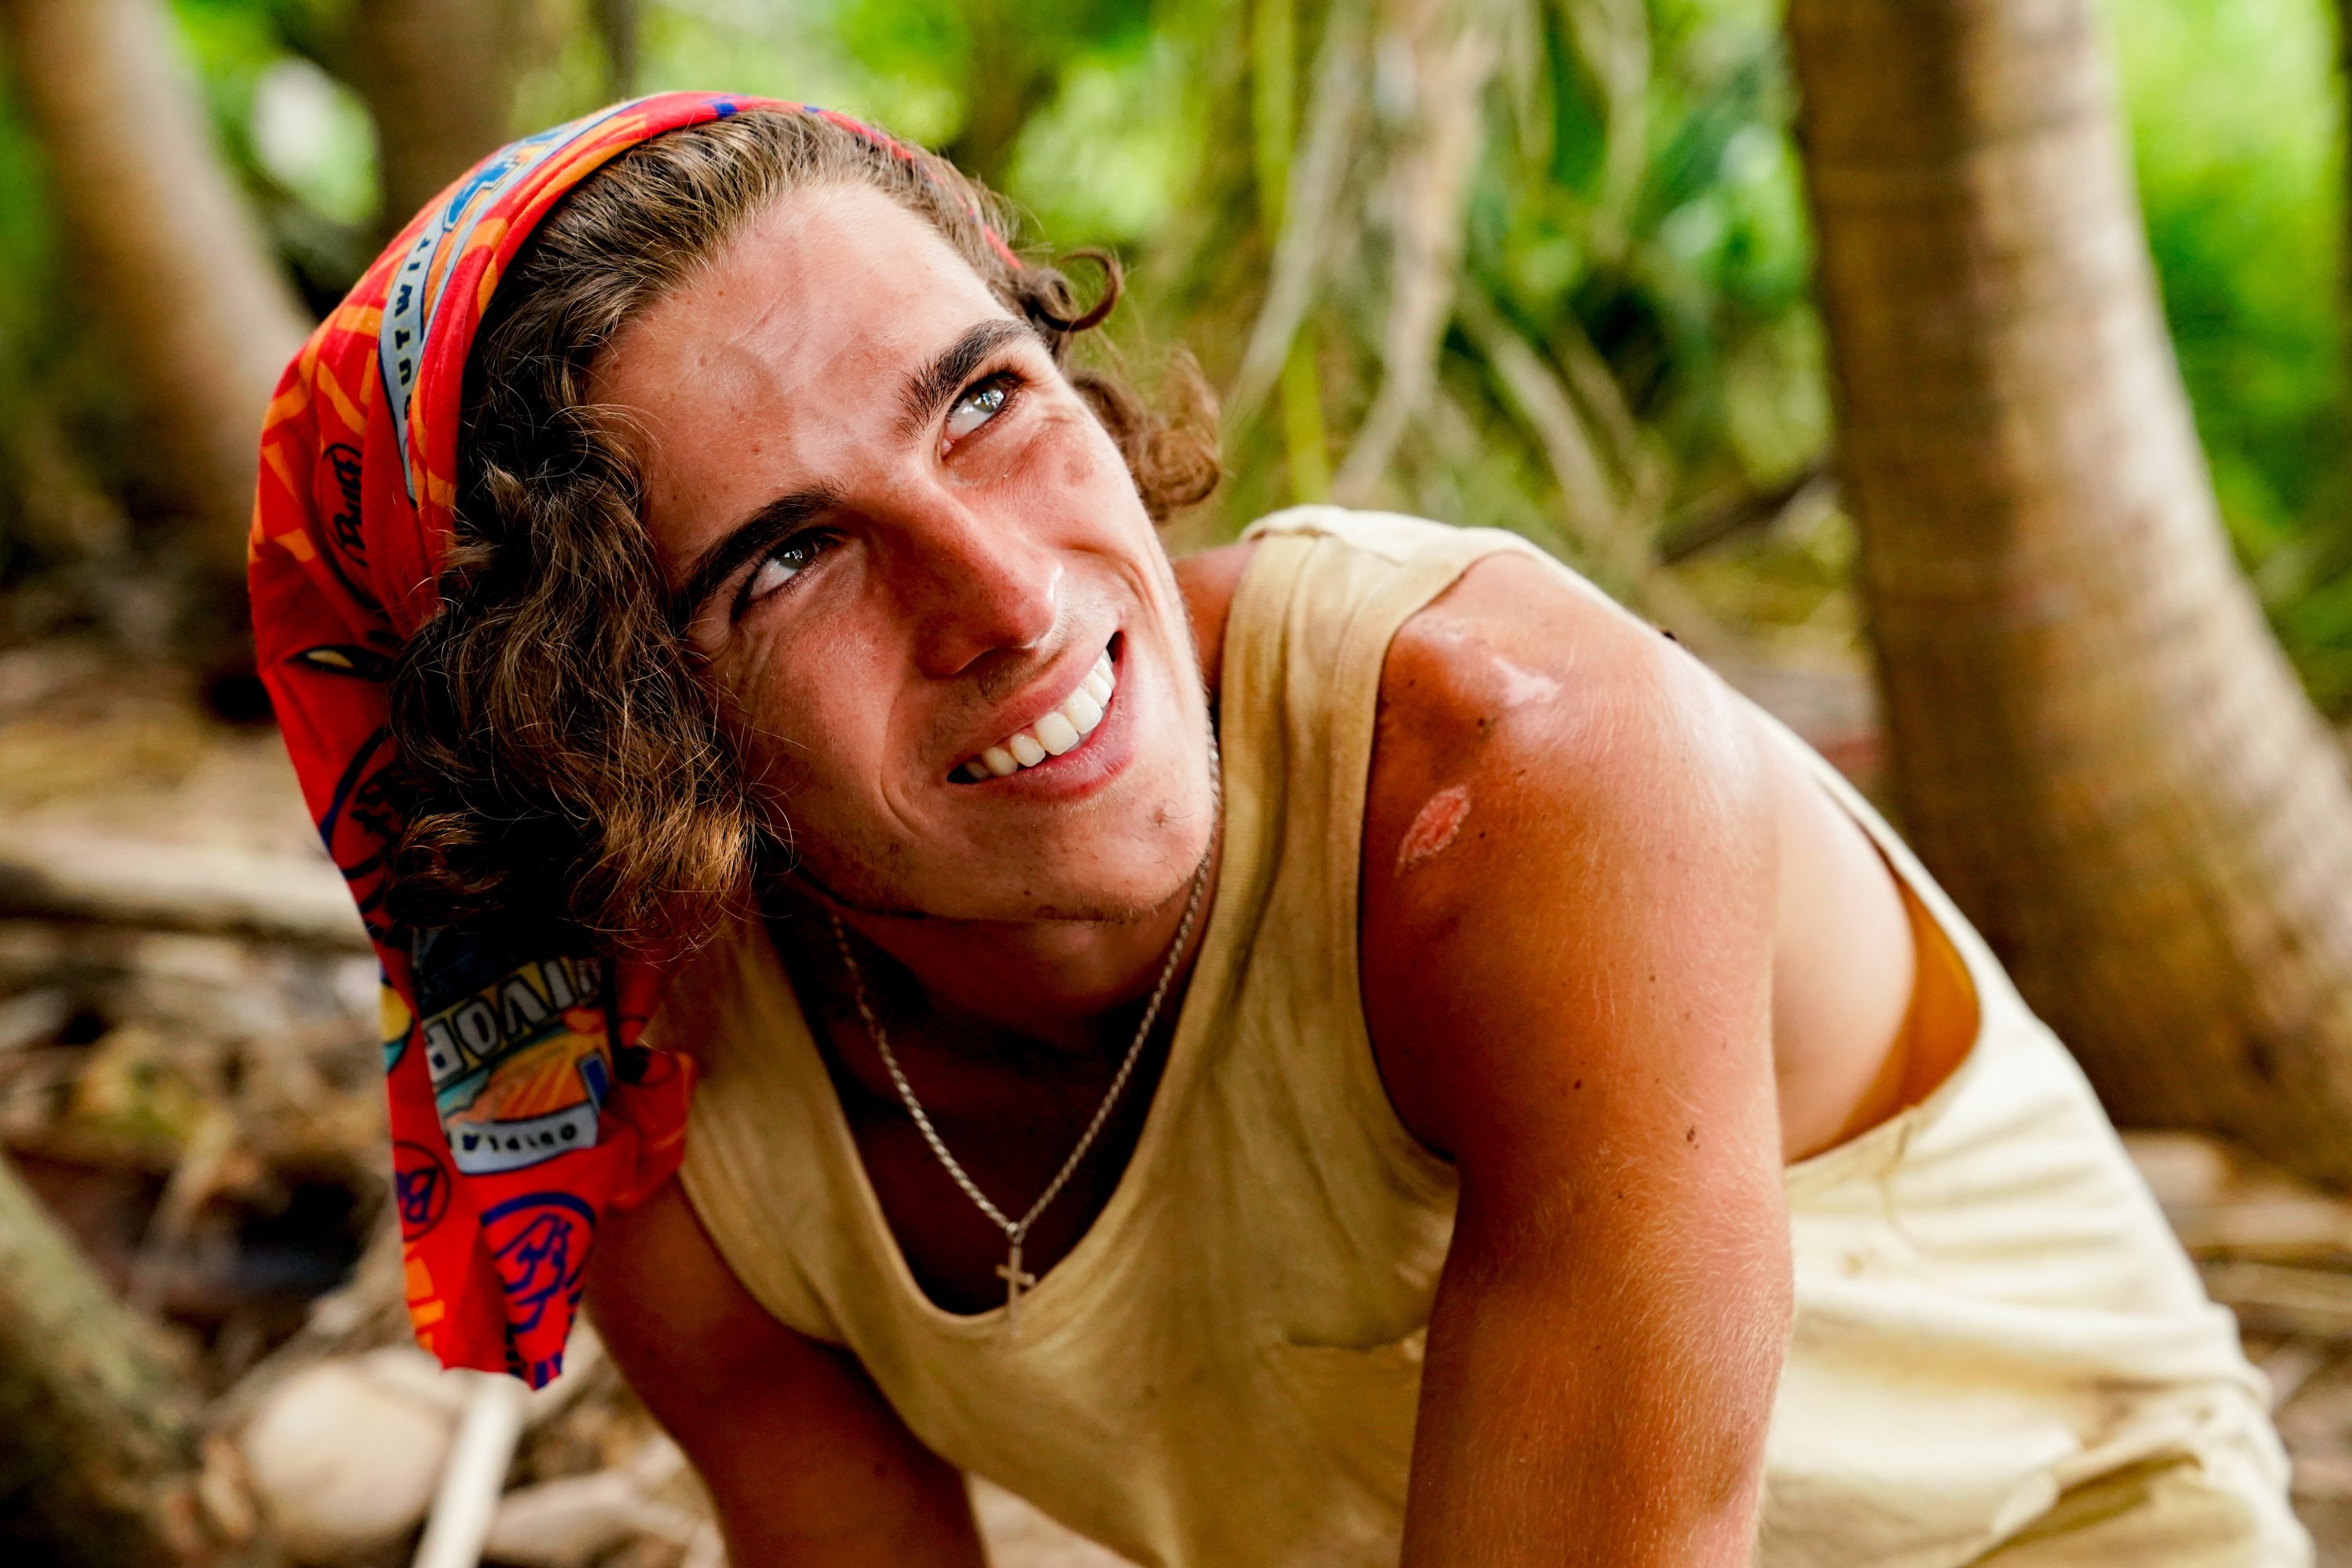 'Survivor' Season 41 castaway Xander Hastings wears a yellow tank top and a red buff on his head.